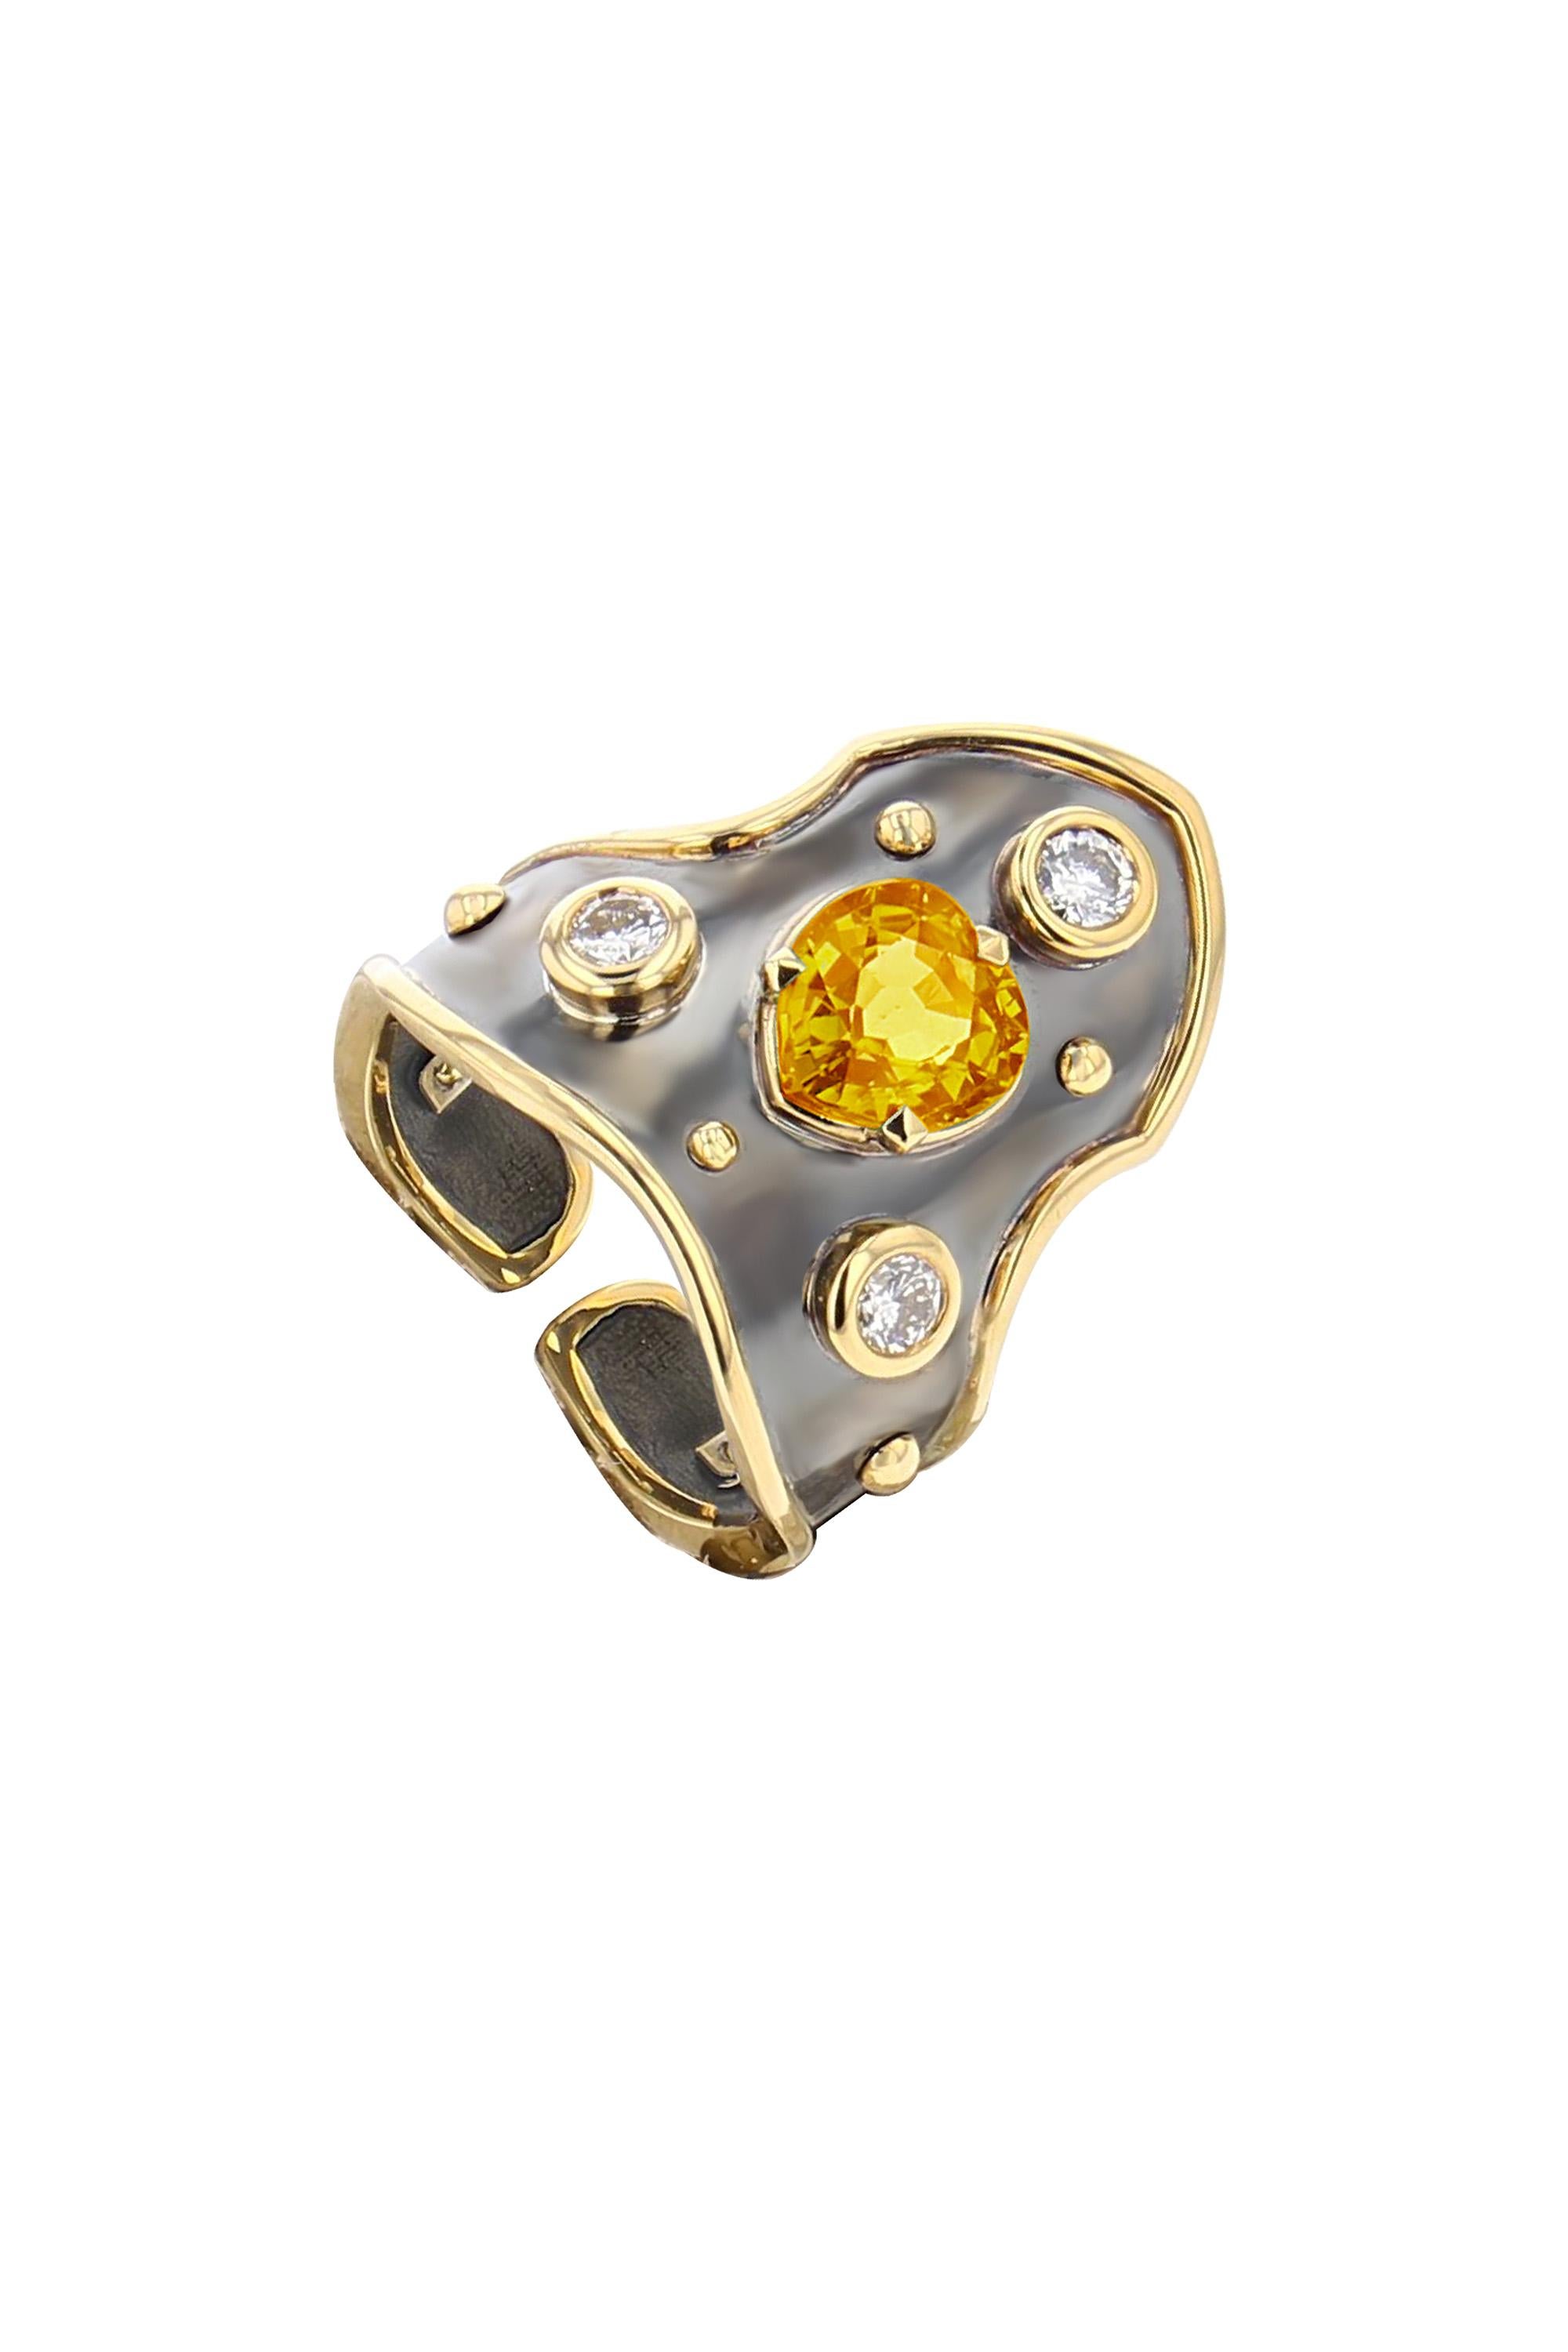 Yellow gold and distressed silver ring studded with a yellow sapphire heart surrounded by 3 diamonds.

Details:
Yellow Sapphire Madagascar Certified: 1.42 cts
Diamonds: 0.3 cts
18k Yellow Gold: 3.8 g
Distressed Silver: 2.9 g
Made in France